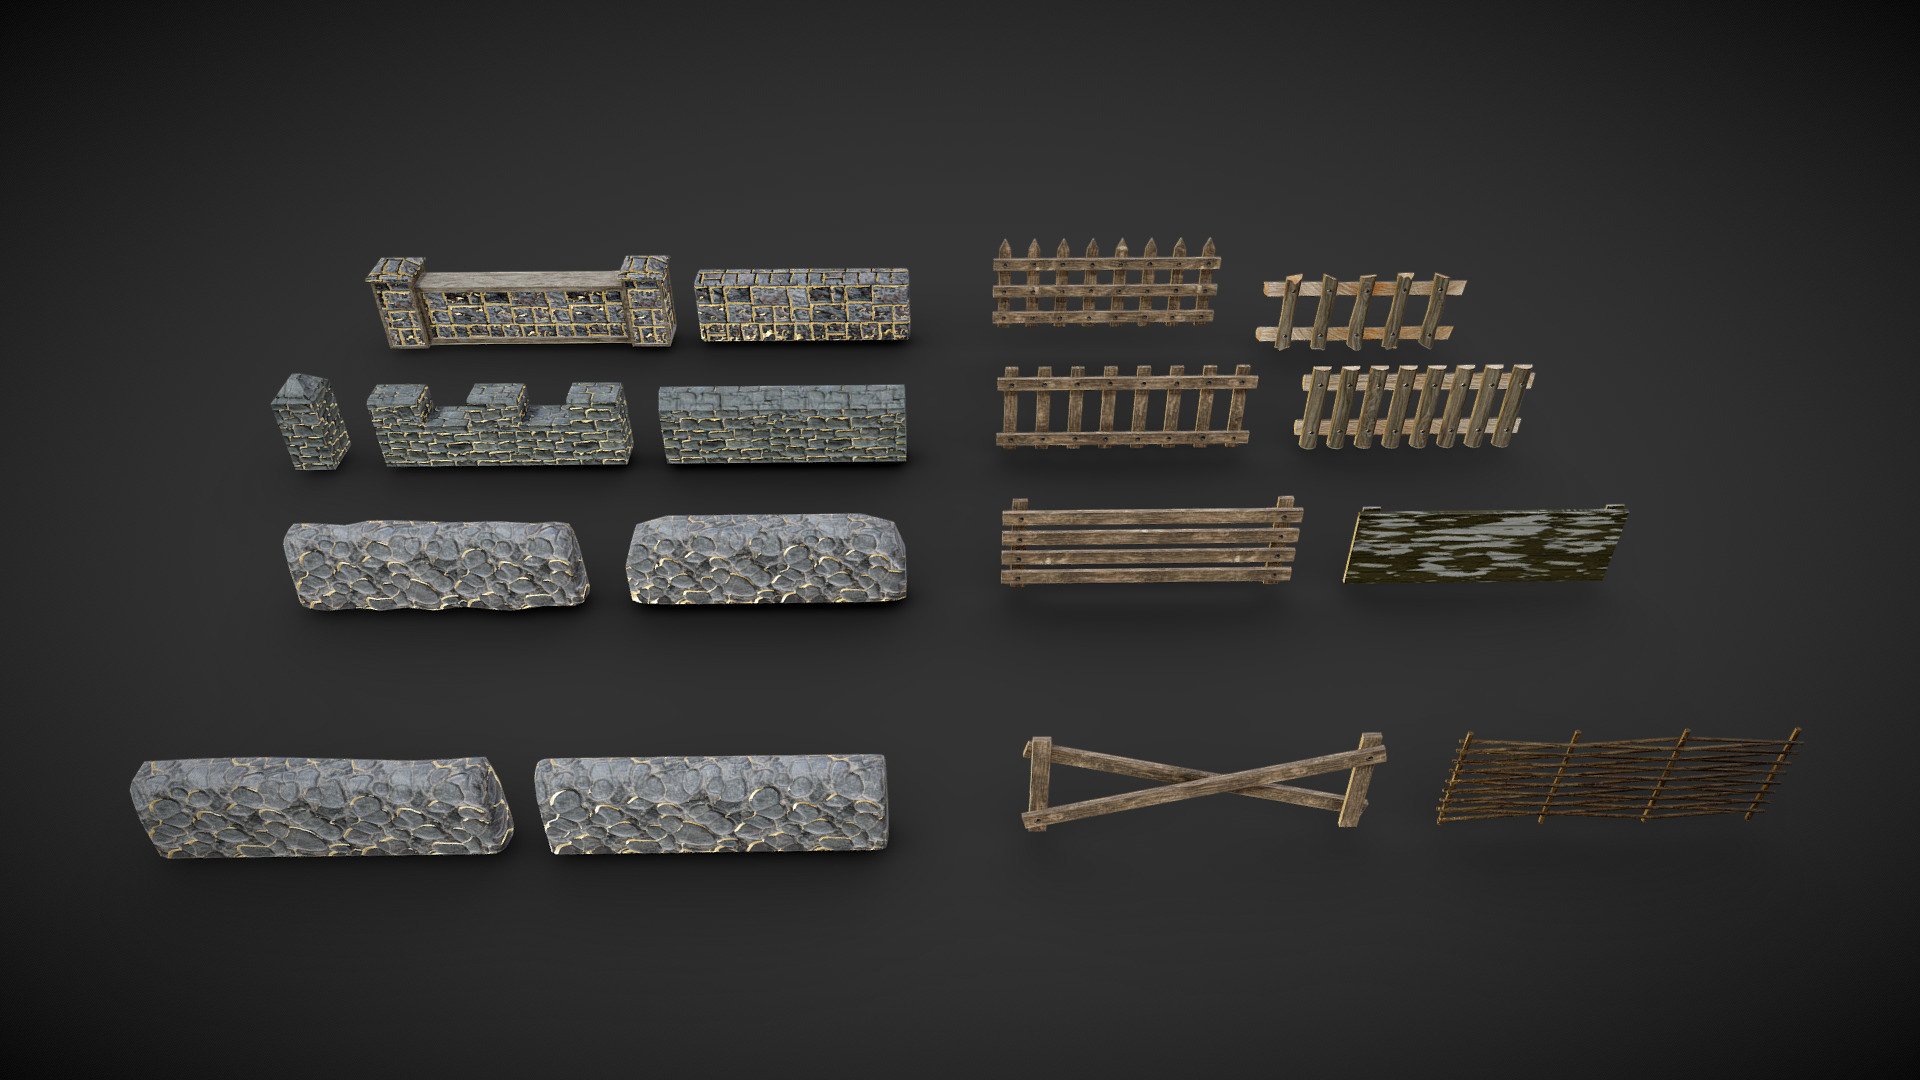 Sketchfab viewport textures are at 1024x1024 , Actual rar. file textures at 2048x2048.

Pack of 16 Lowpoly models.

Fence1: 144 polys , 155 verts.
Fence2: 160 polys , 173 verts.
Fence3: 7 polys , 12 verts.
Fence4: 35 polys , 48 verts.
Fence5: 132 polys , 145 verts.
Fence6: 184 polys , 199 verts.
Fence7: 25 polys , 24 verts.
Fence8: 113 polys , 136 verts.
Fence9: 24 polys , 32 verts.
Fence10: 36 polys , 48 verts.
Fence11: 60 polys , 80 verts.
Fence12: 98 polys , 120 verts.
Fence13: 456 polys , 576 verts.
Fence14: 18 polys , 24 verts.
Fence15: 90 polys , 140 verts.
Fence16: 200 polys , 231 verts.
Corner: 10 polys , 12 verts.

The rar. file contains a folder for  Textures(Unreal4 and unity5) , Fbx's and Obj's files 3d model